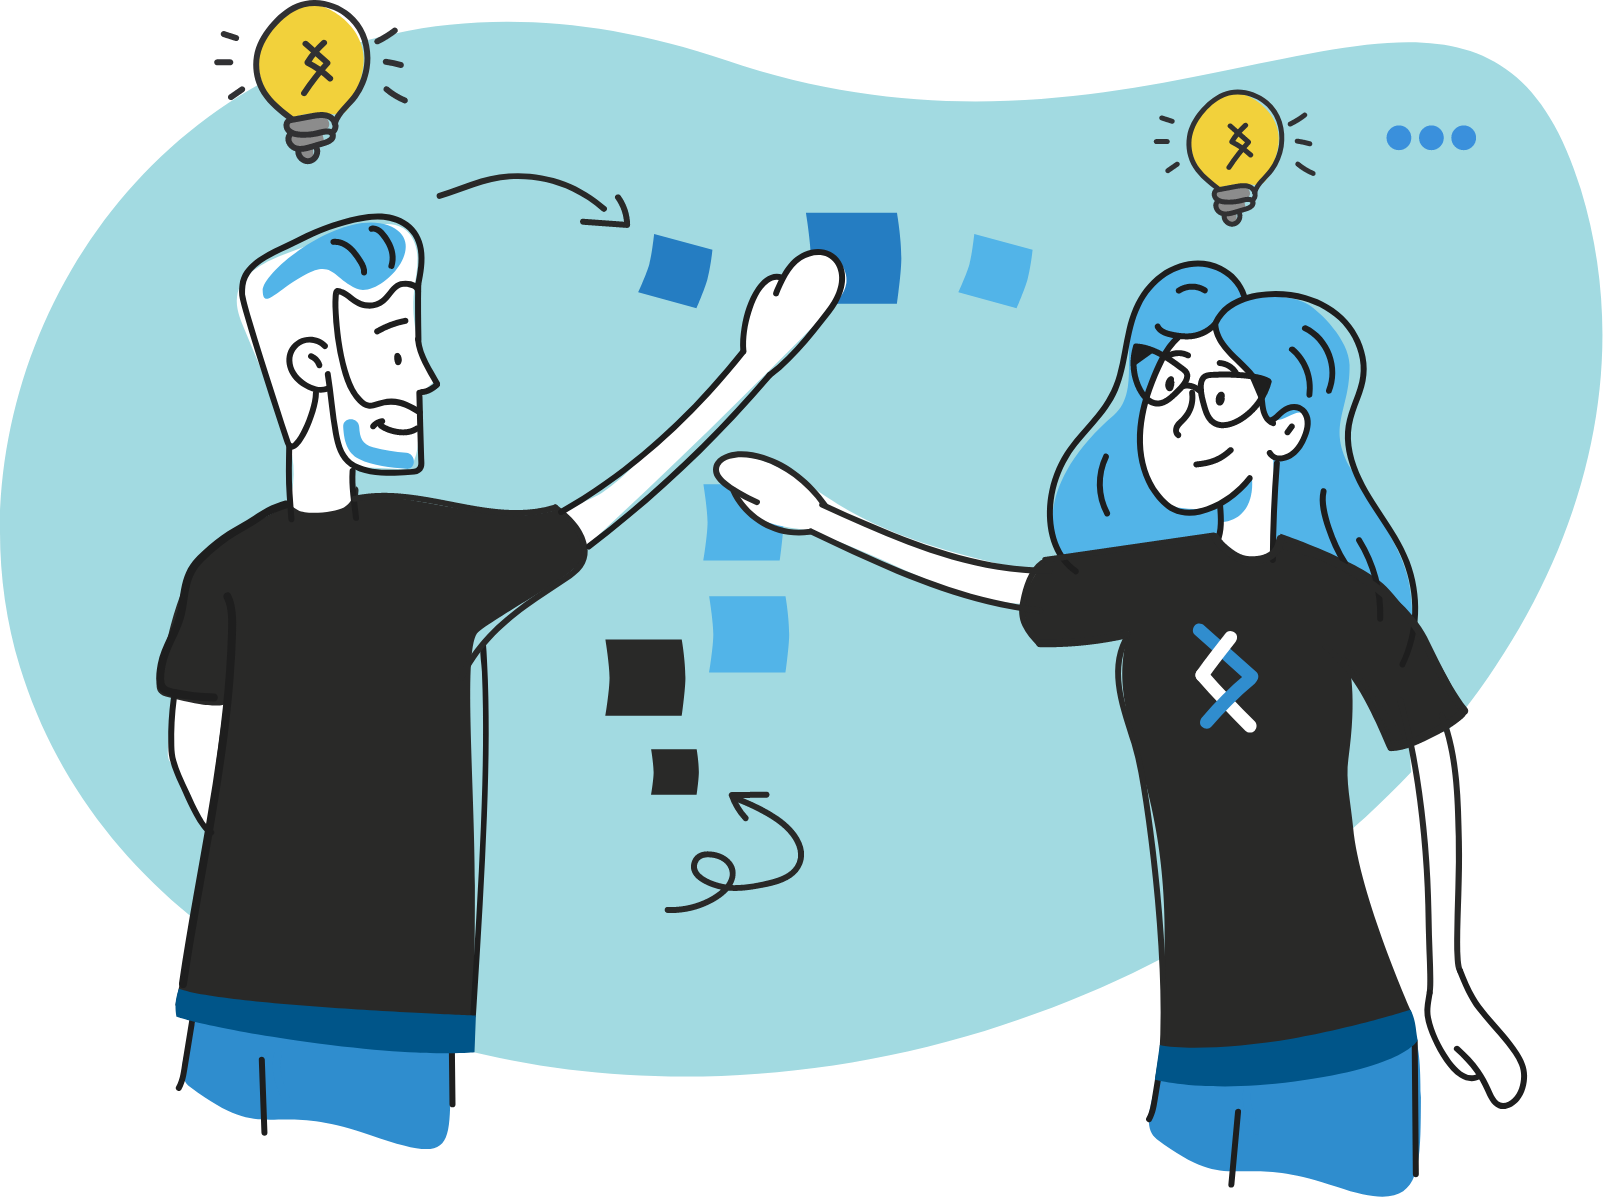 Illustration of two DNX characters with lightbulb idea, moving sticky notes